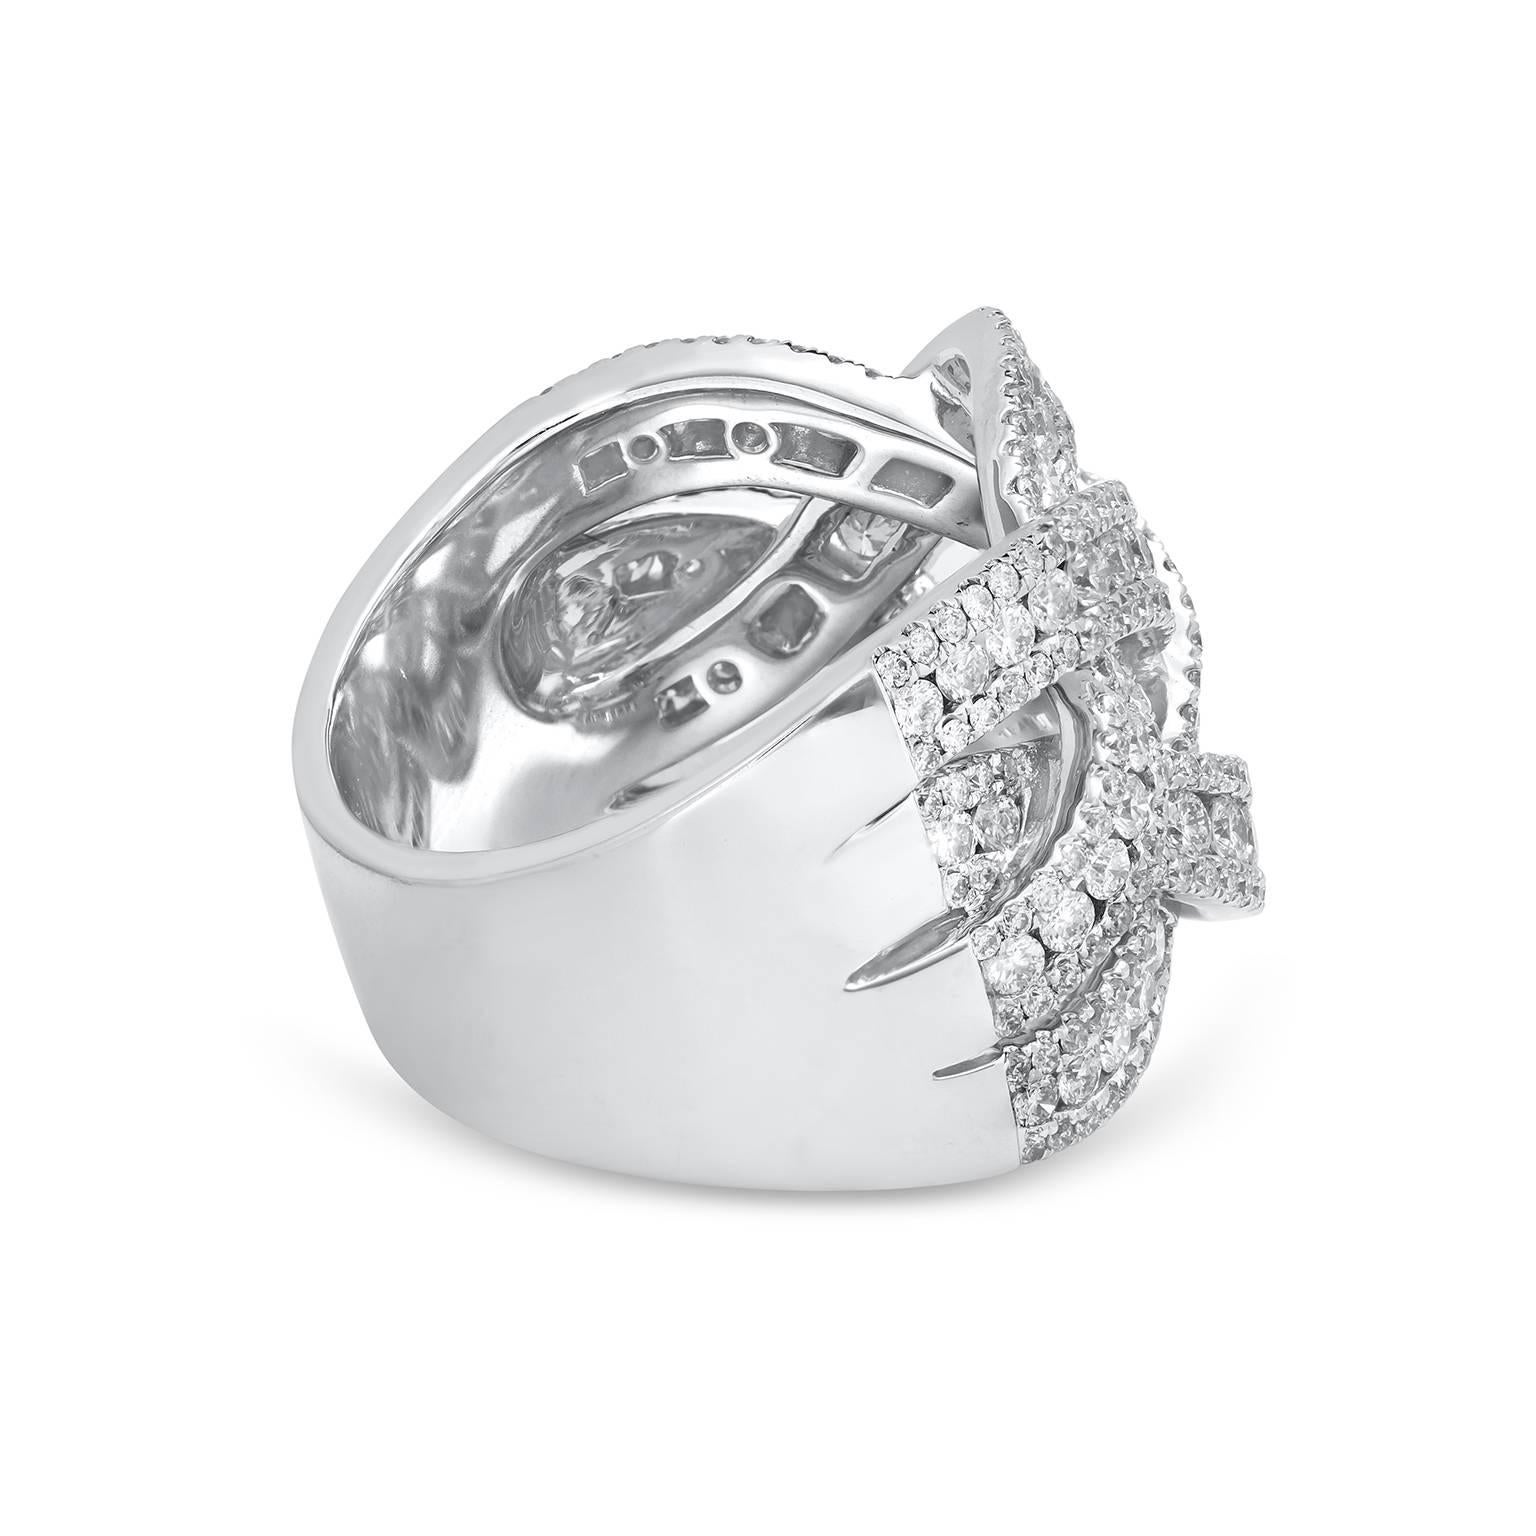 A gorgeous piece of jewelry featuring an intricately-designed intertwined design set with sparkling diamonds. Each intertwining line set with three rows of diamonds for a gorgeous sparkle finish. Diamonds weigh 2.38 carats total. 18k white gold